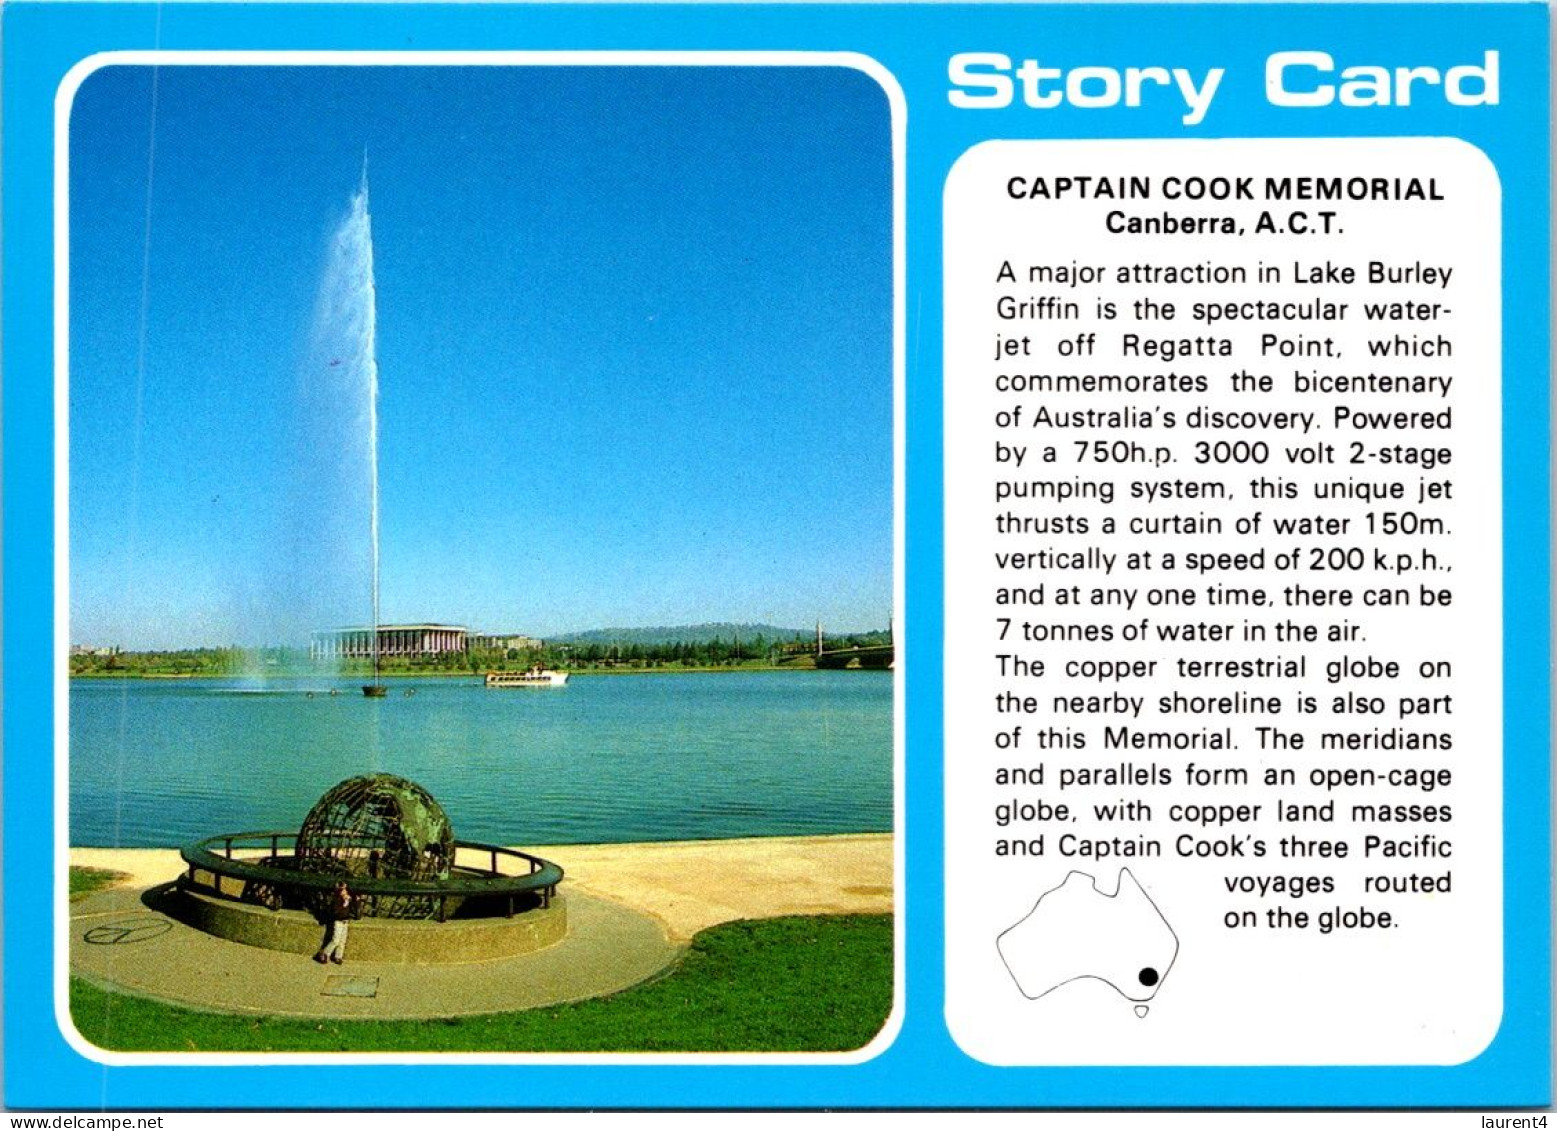 1-3-2025 (1 Y 35) Australia - ACT - Canberra Captain Cook Memorial (story Card) - Canberra (ACT)